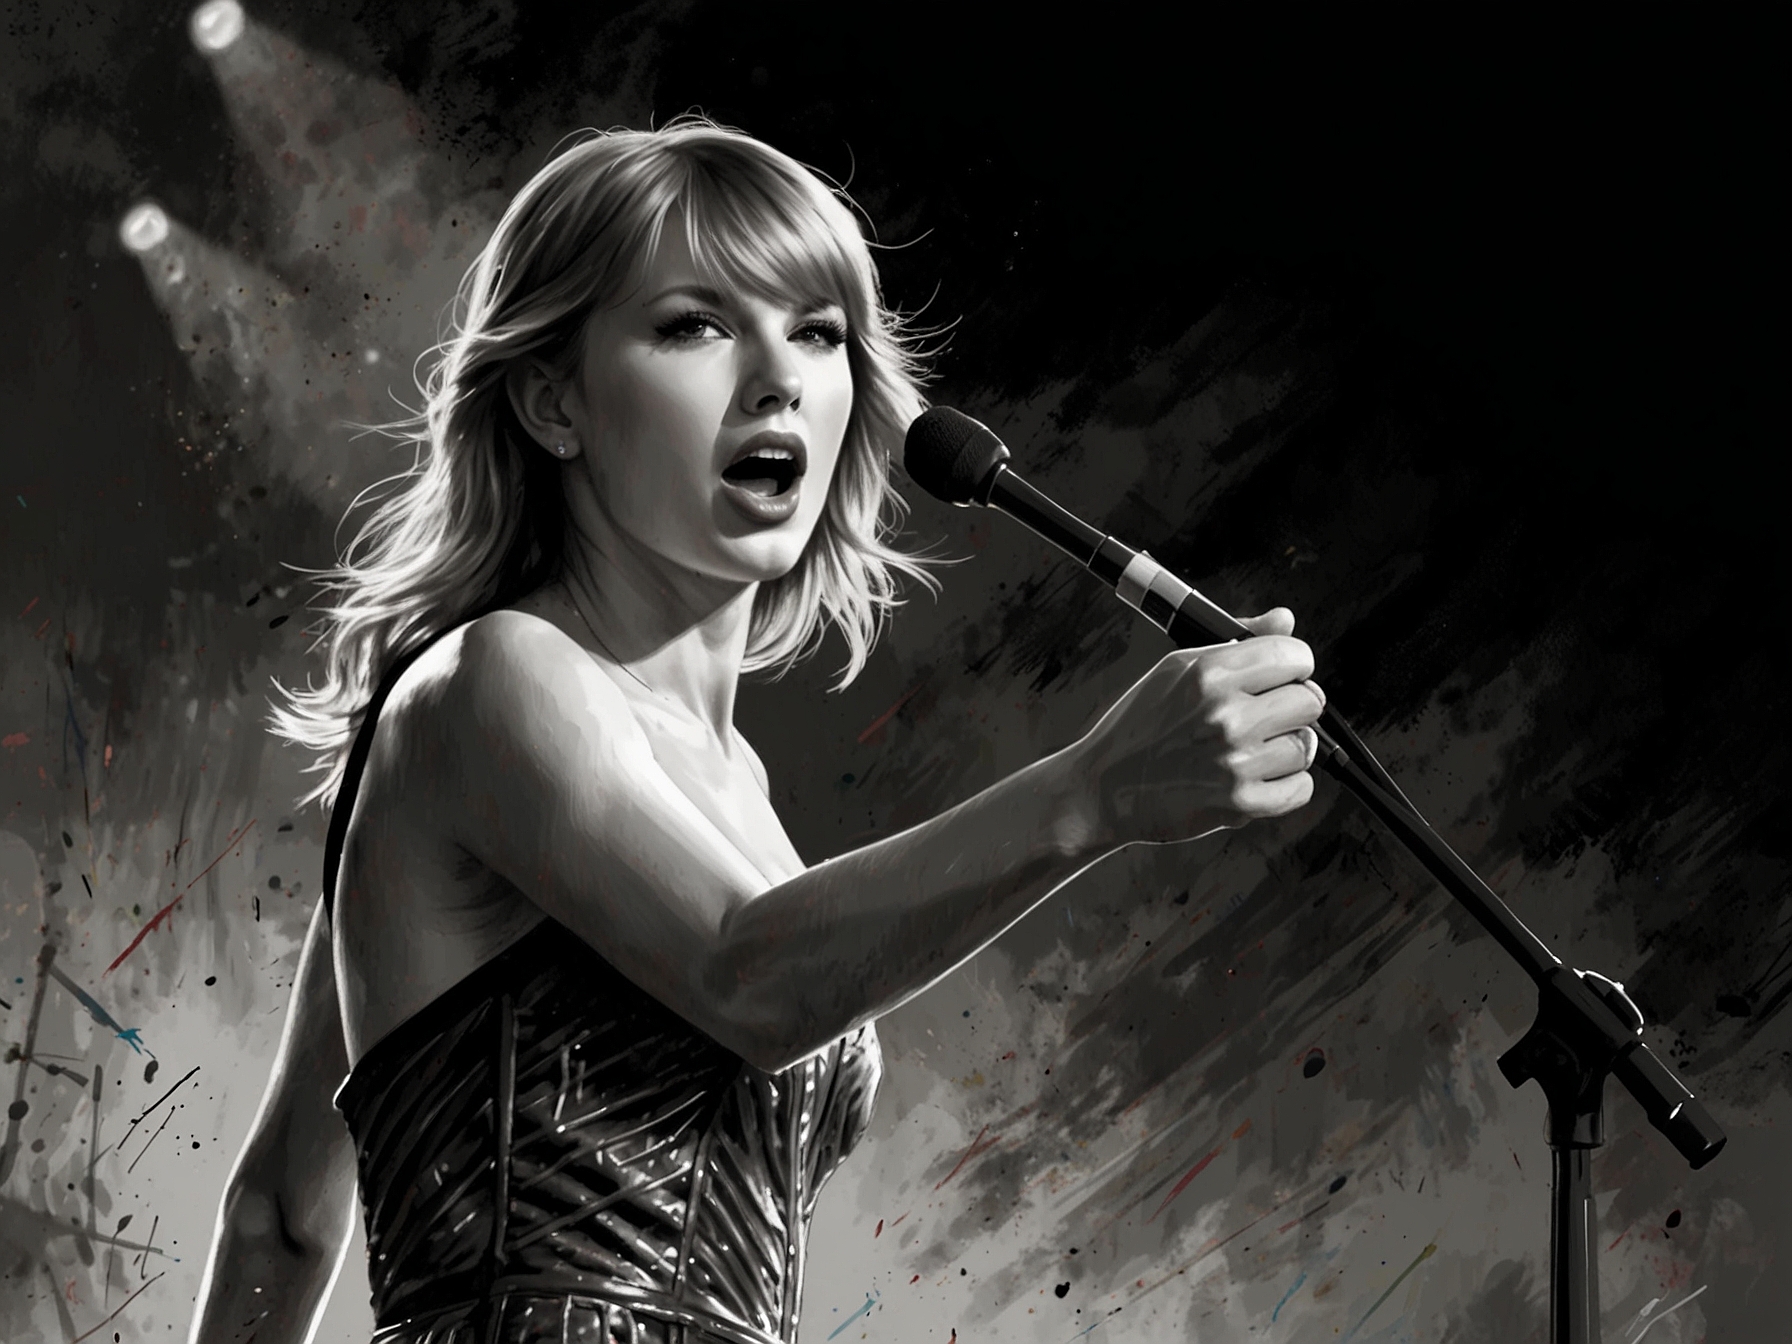 An image showing Taylor Swift performing on stage, highlighting her prominence in the music industry and underscoring the significance of her masters’ ownership dispute.